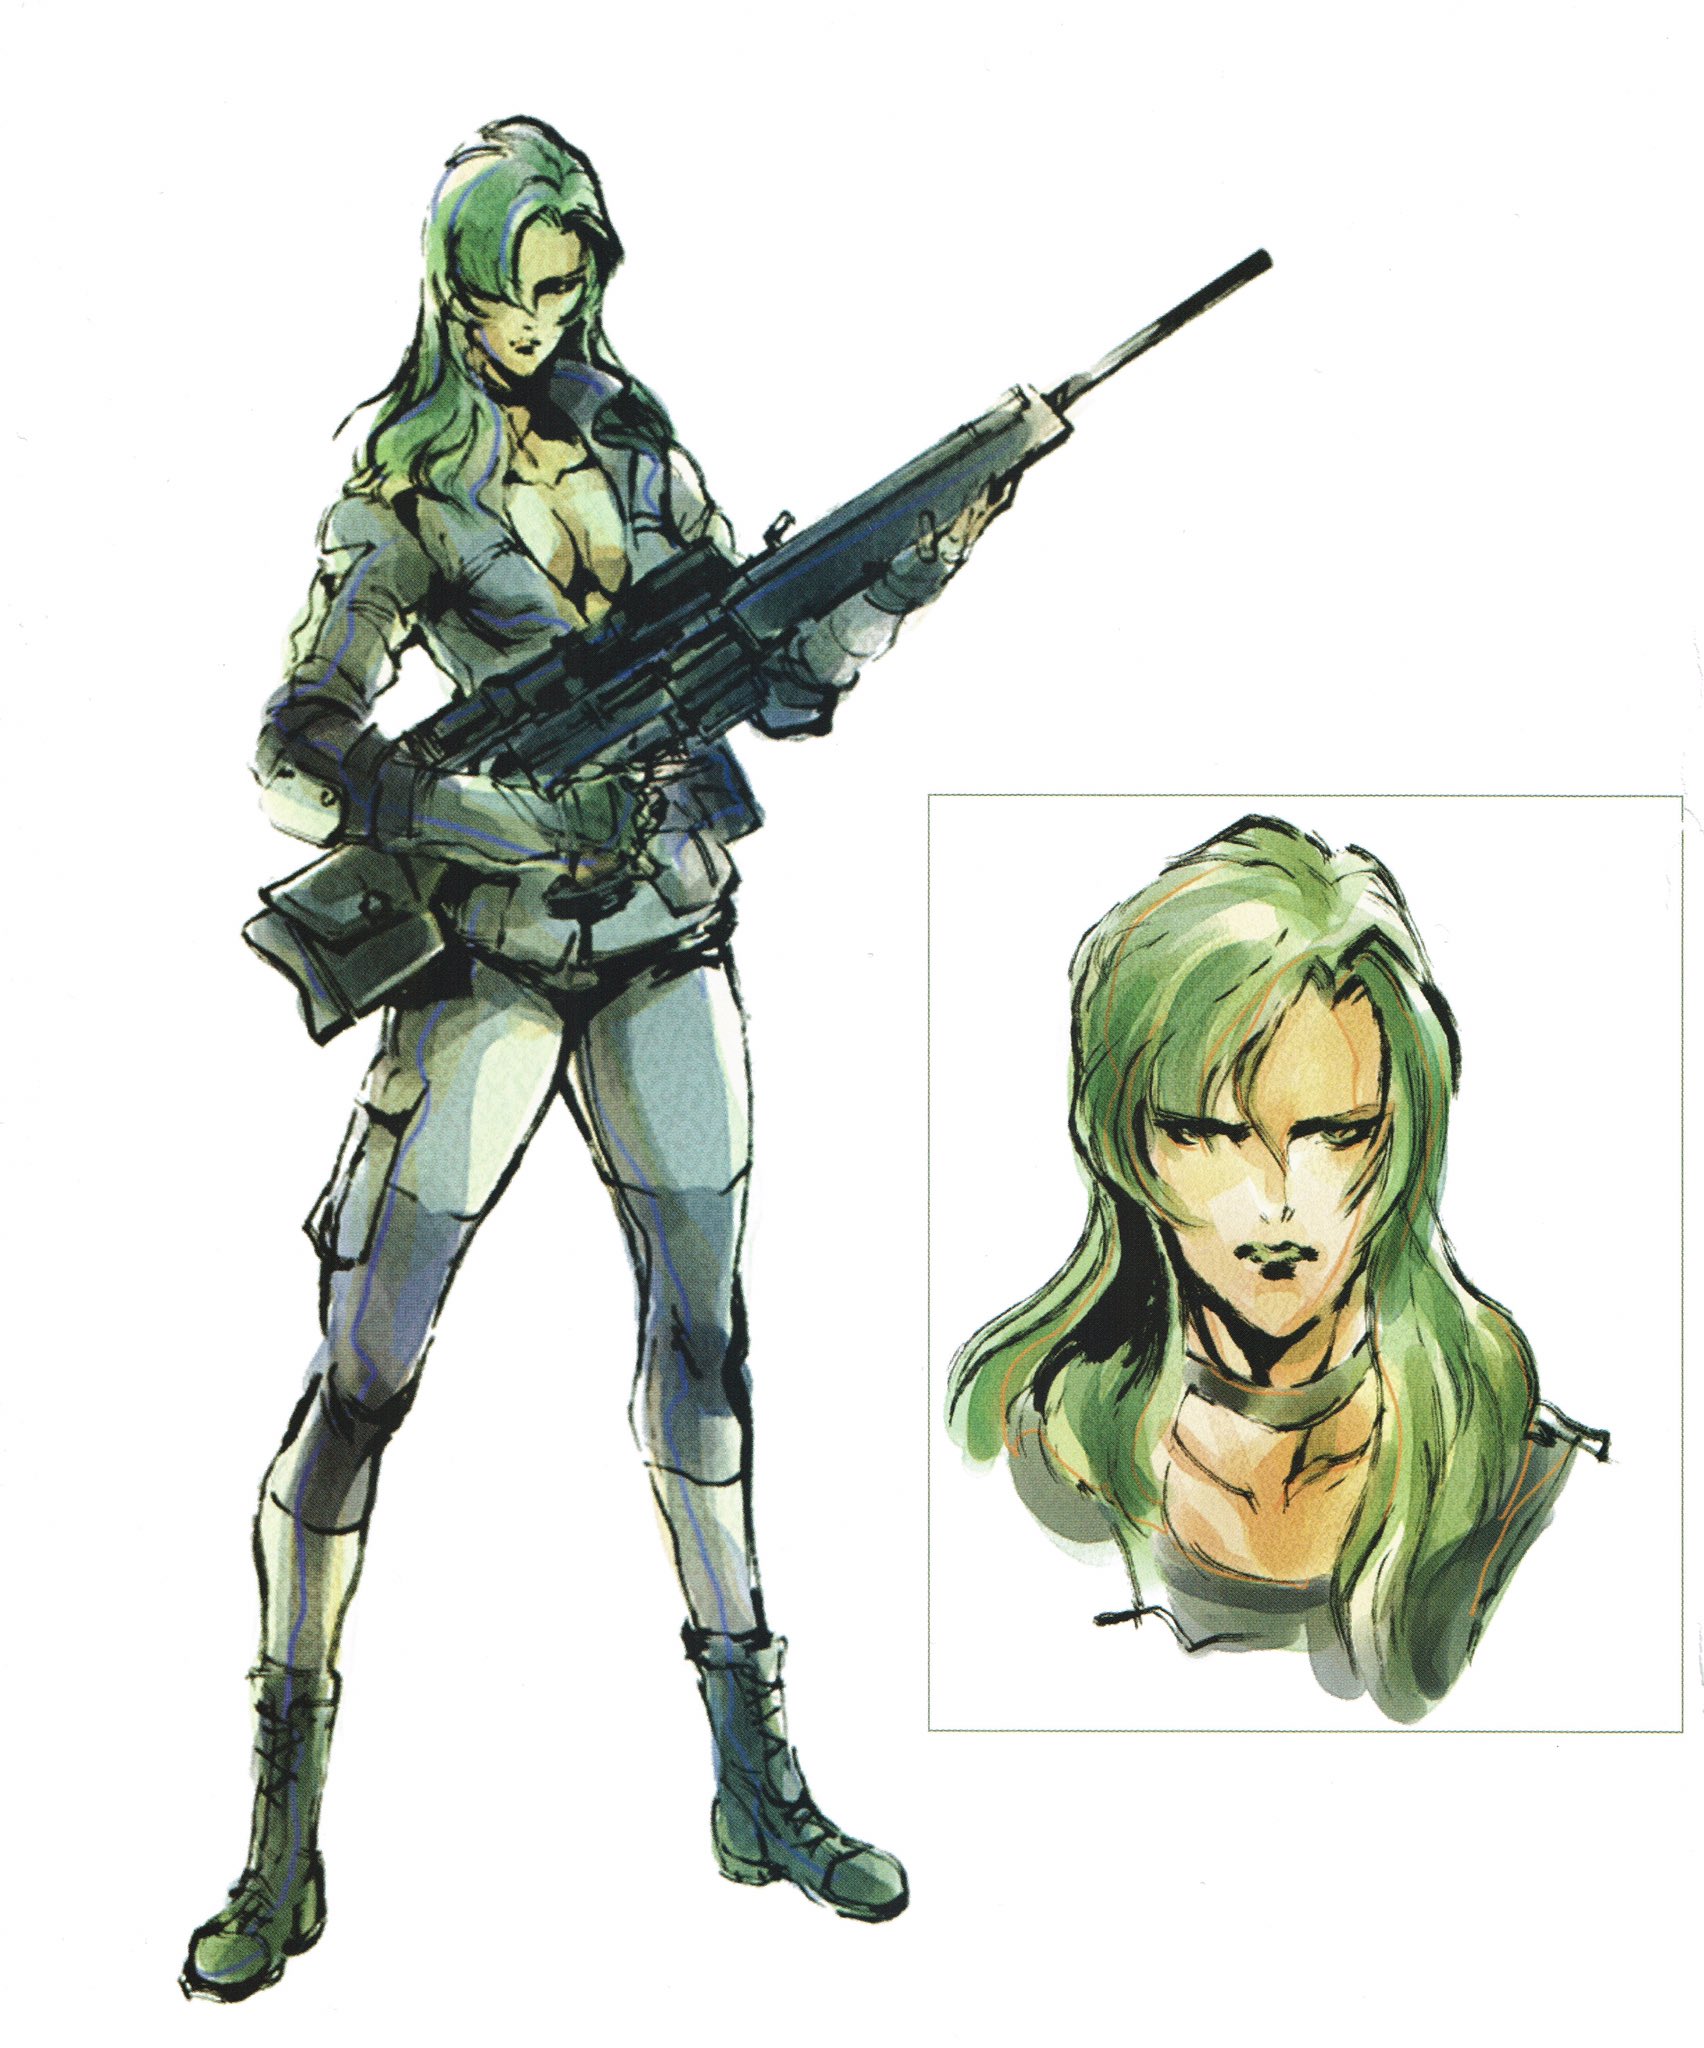 “Metal Gear Solid - Sniper Wolf character artwork.” 